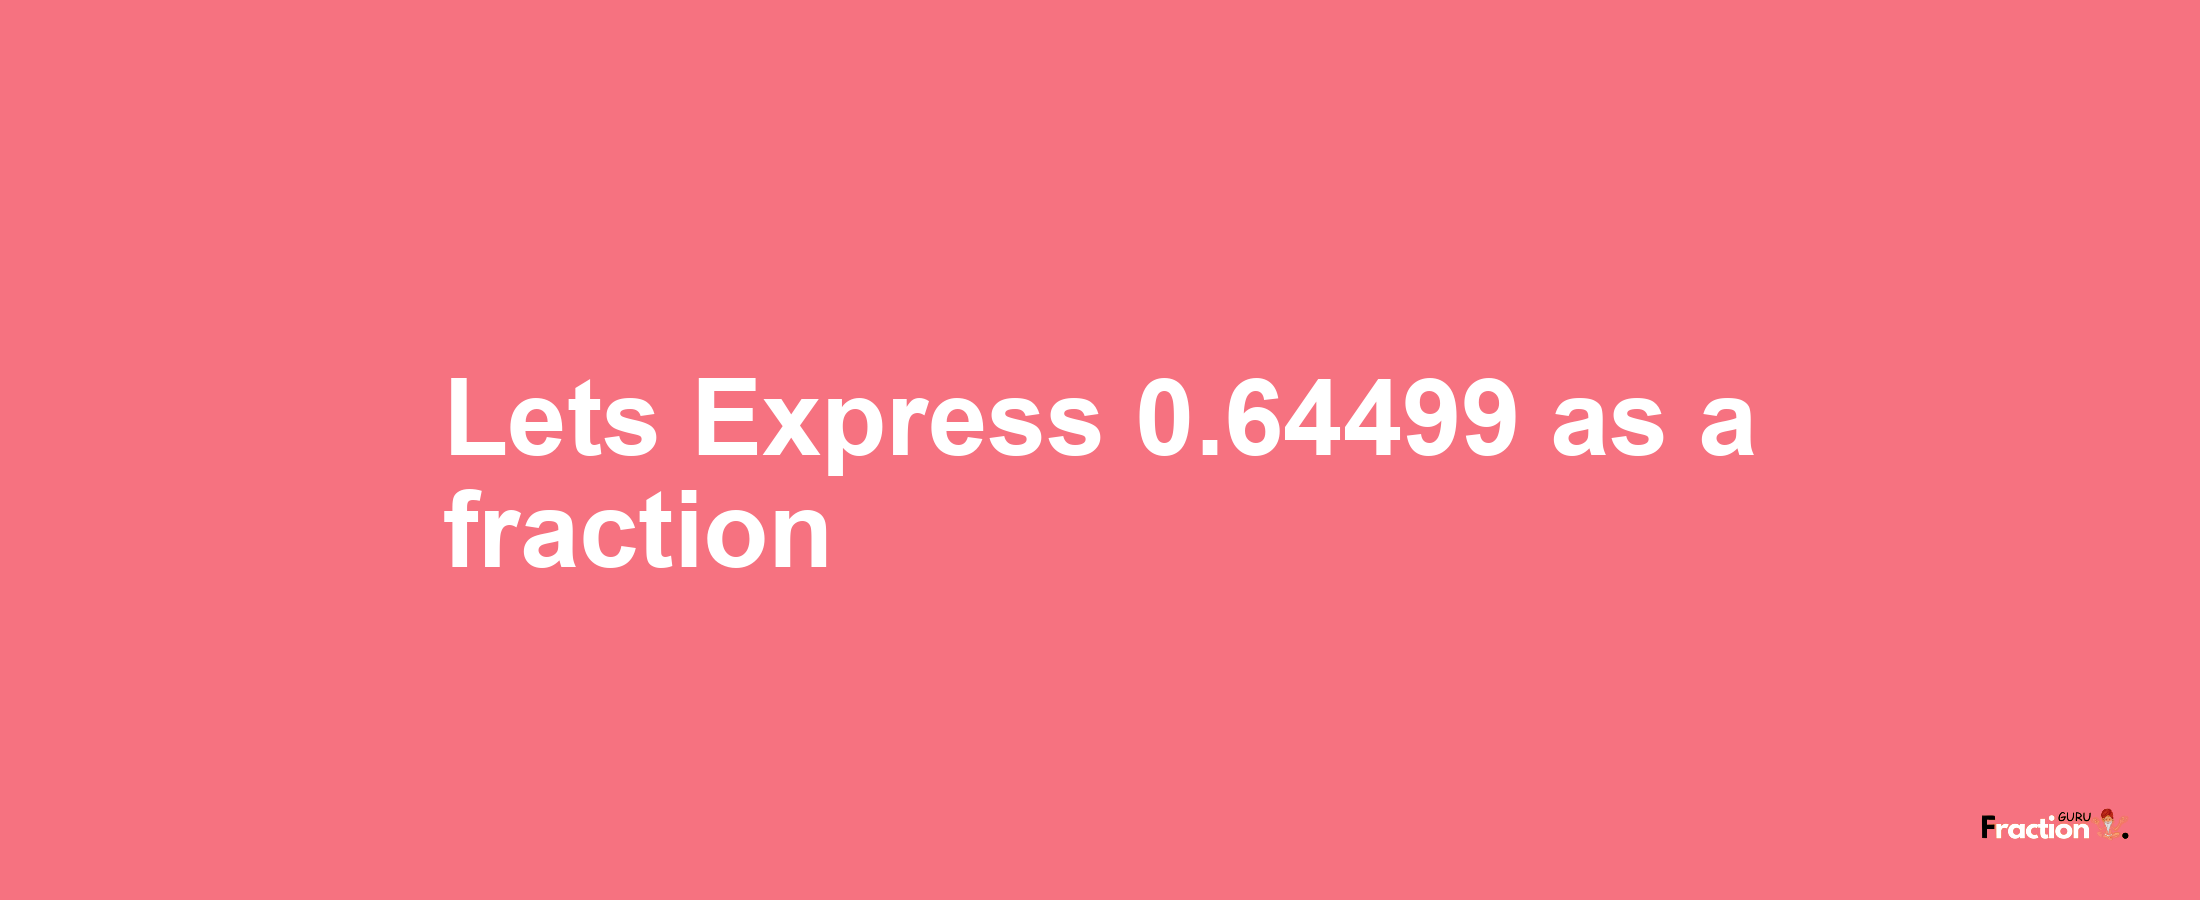 Lets Express 0.64499 as afraction